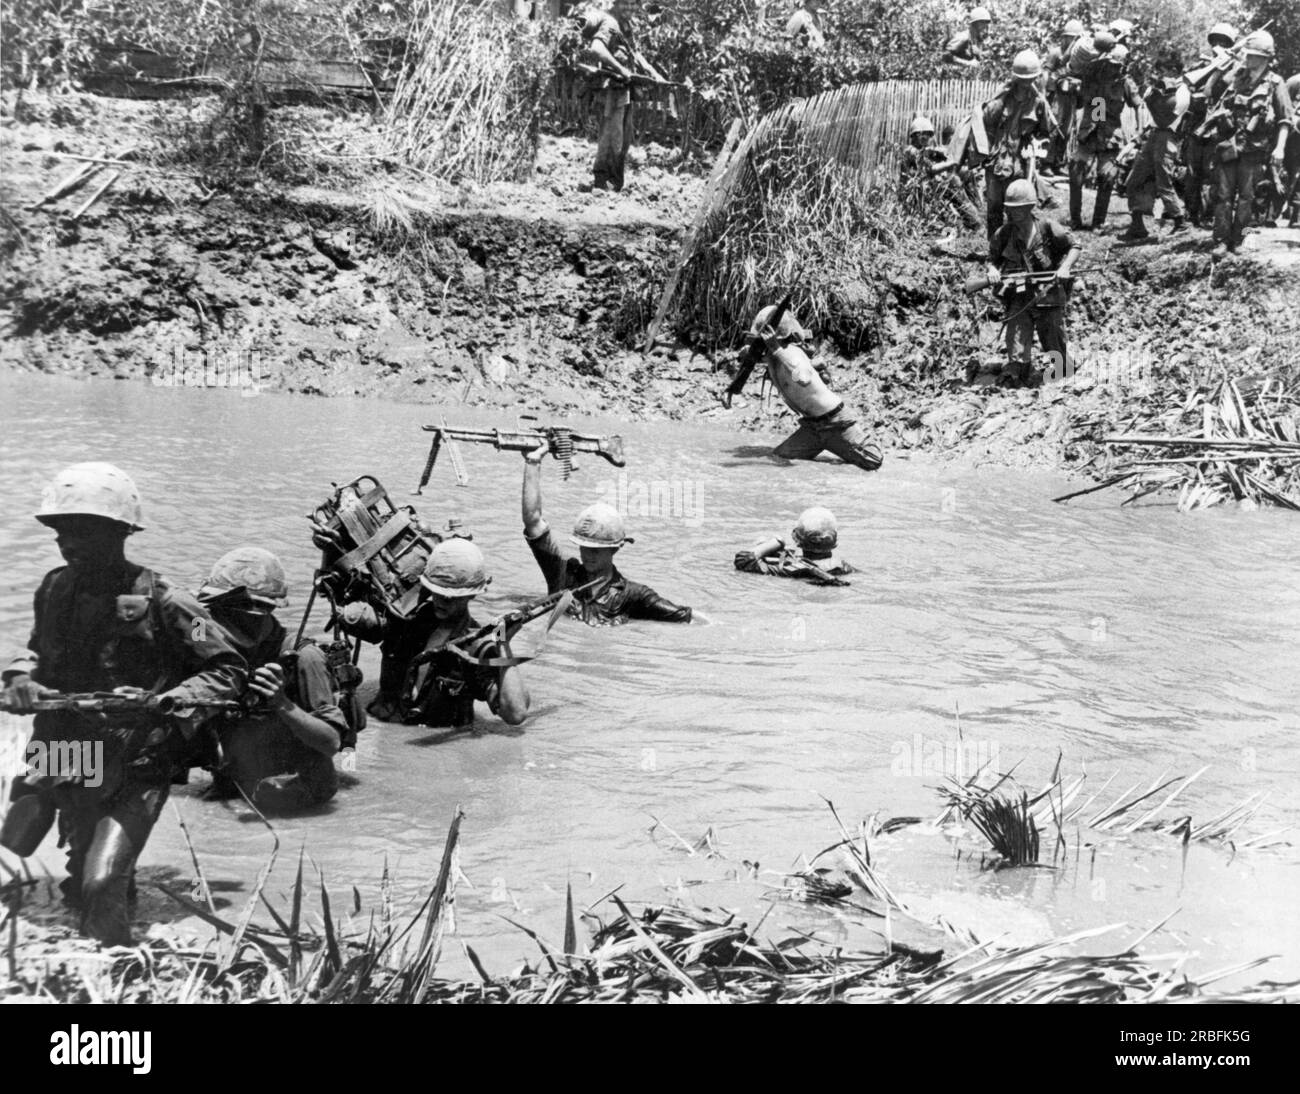 Mekong Delta, Vietnam:  1967 Members of the 9th Infantry Division move across a stream in the Mekong Delta region south of Saigon on a search and destroy mission. Stock Photo